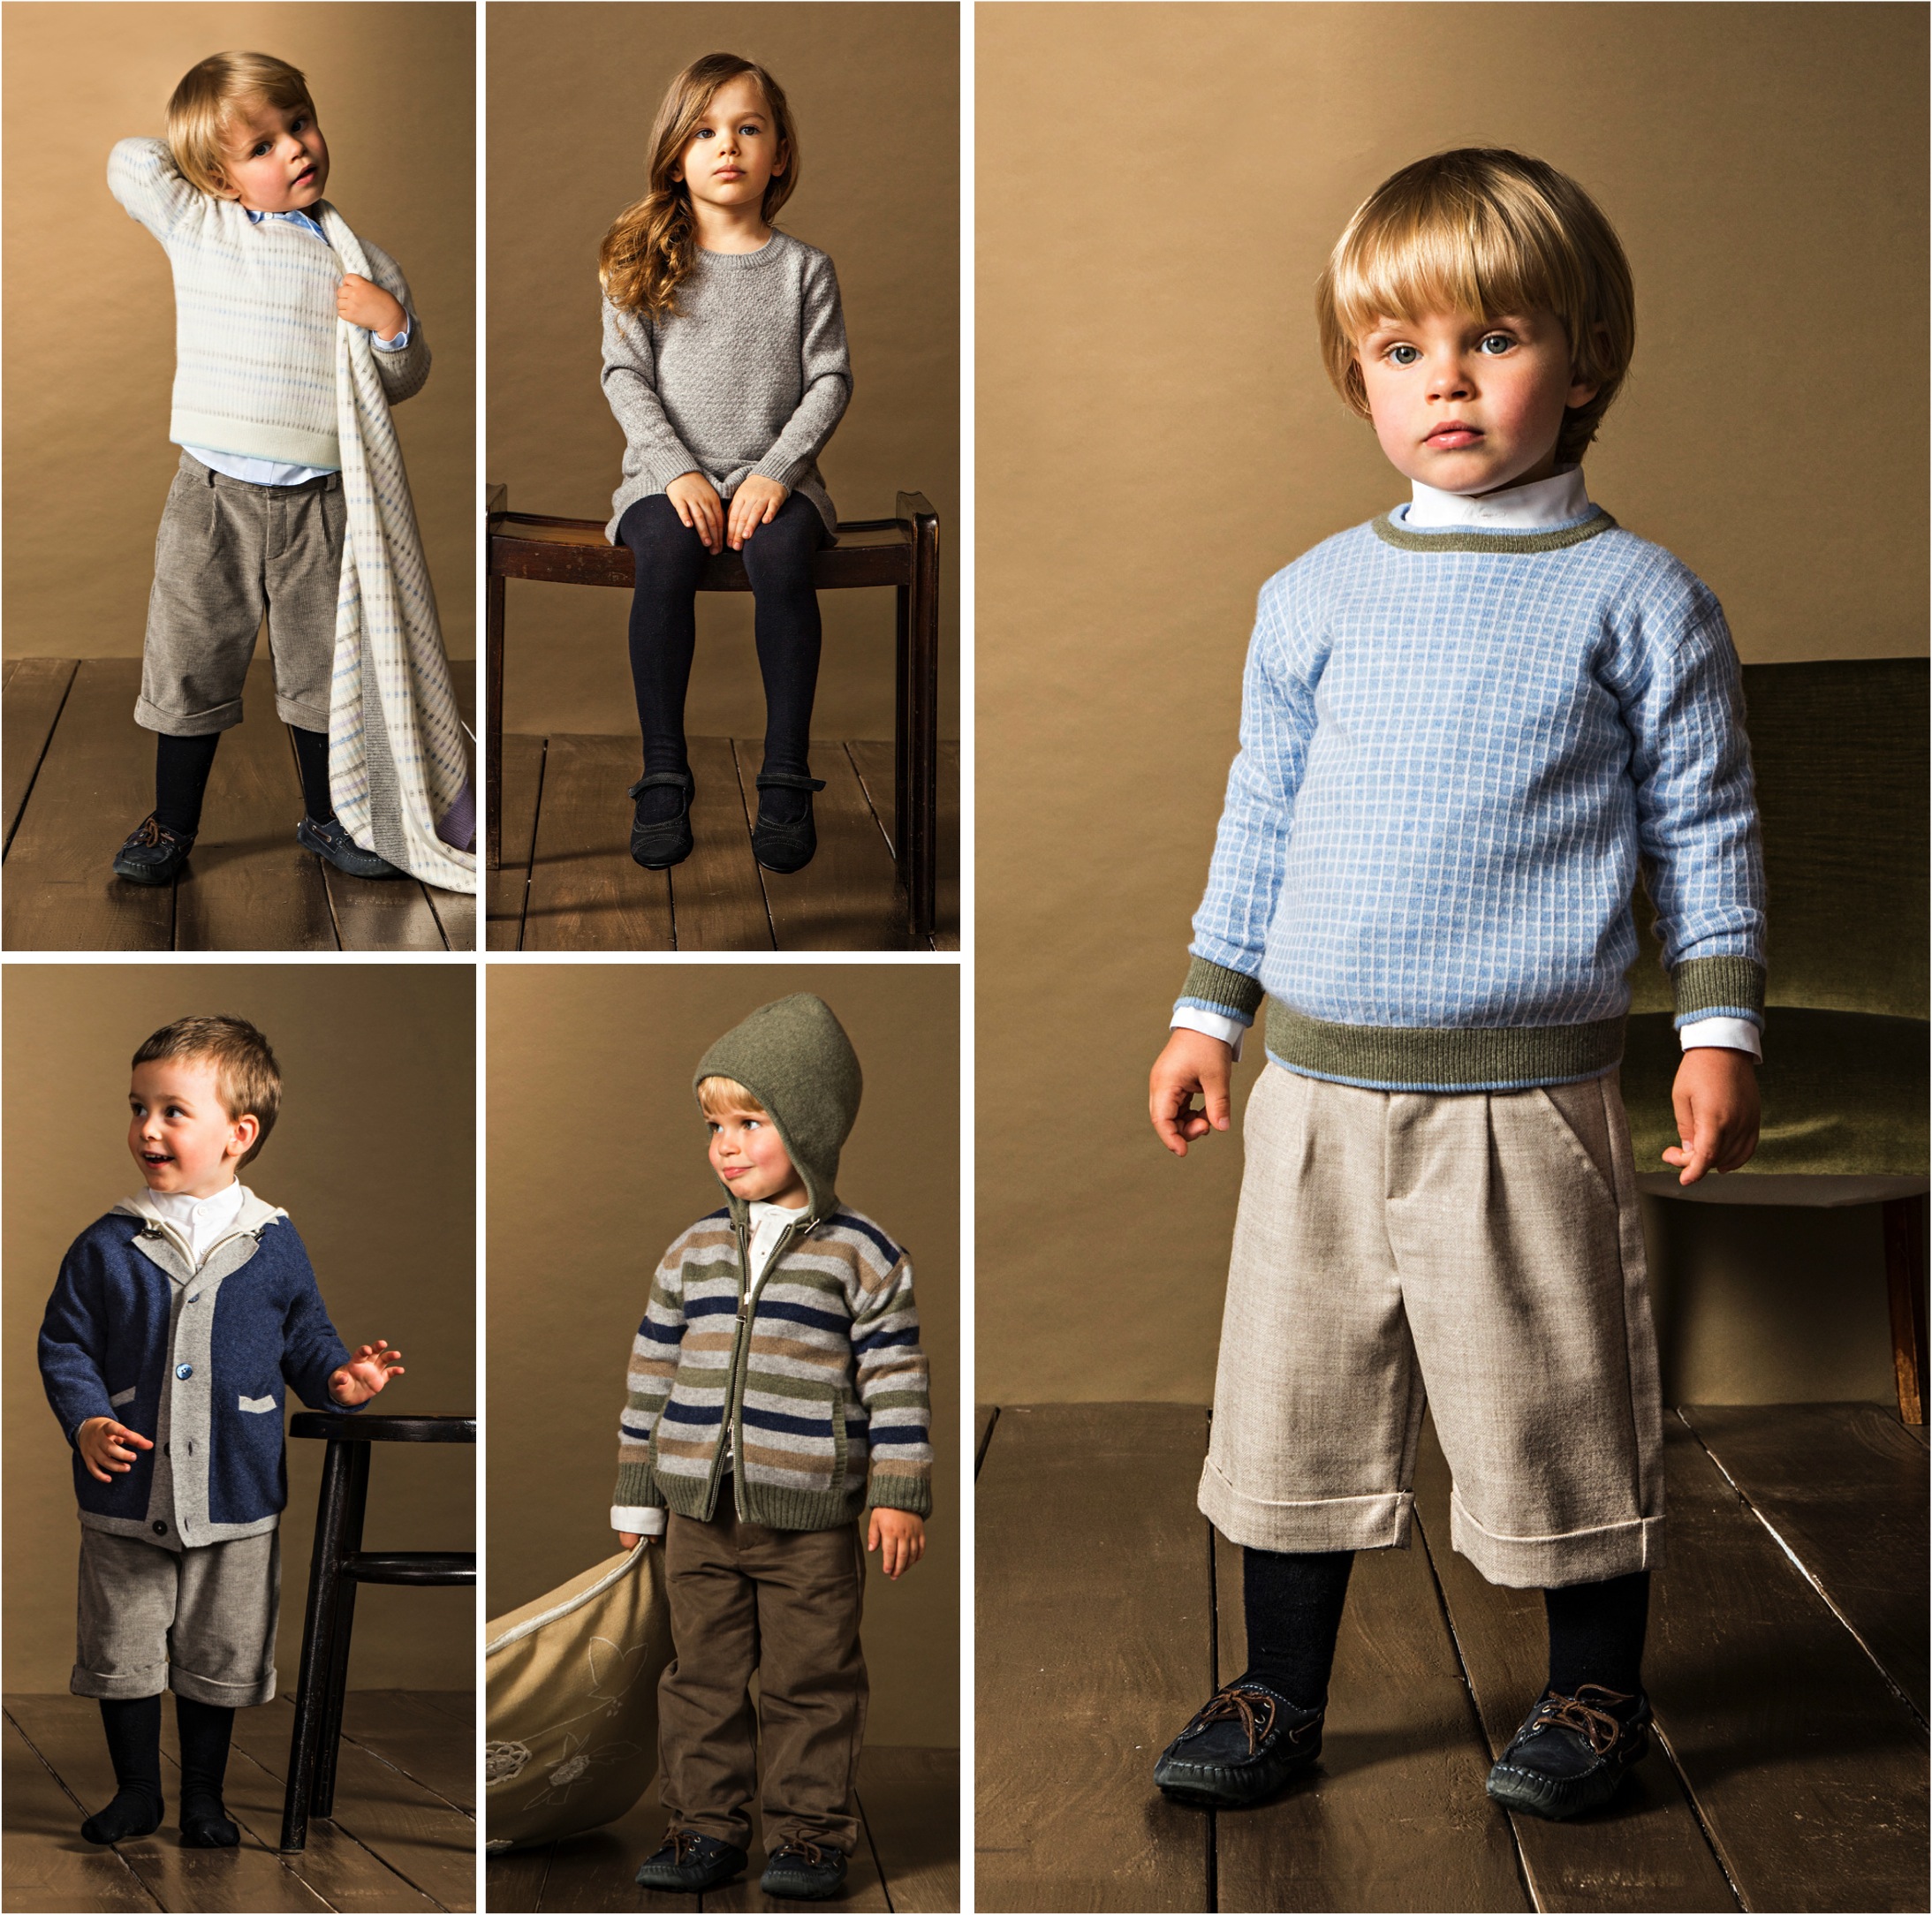 "Italian cashmere clothes for baby and kids"